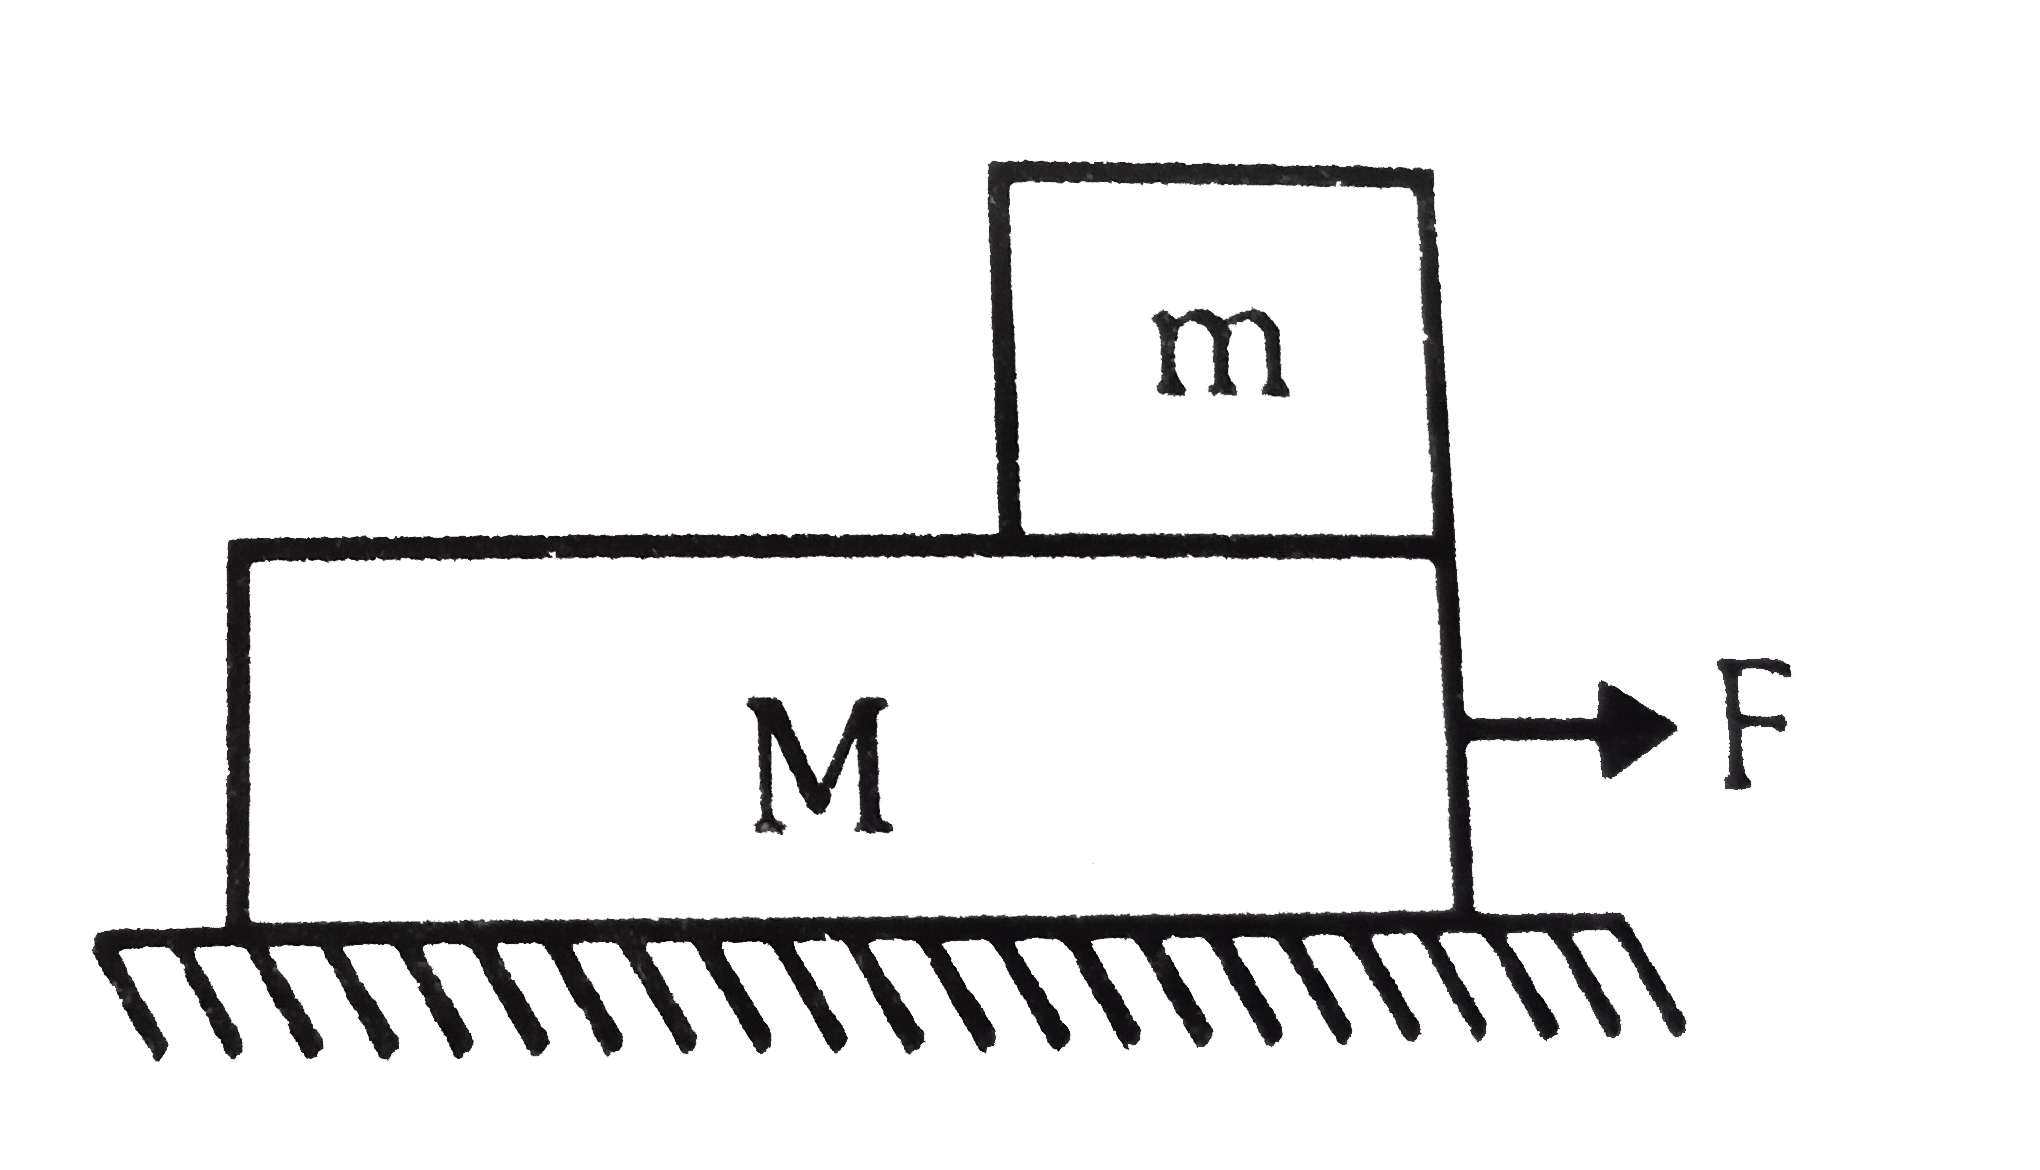 A block of mass'm' it kept over the smooth surface of the plank of mass M. the plank of length l is kept over the smooth horizontal surface. A constant horizontal force F is applied onto the plank as shown in figure. Calculate the time after which the block falls off the plank?